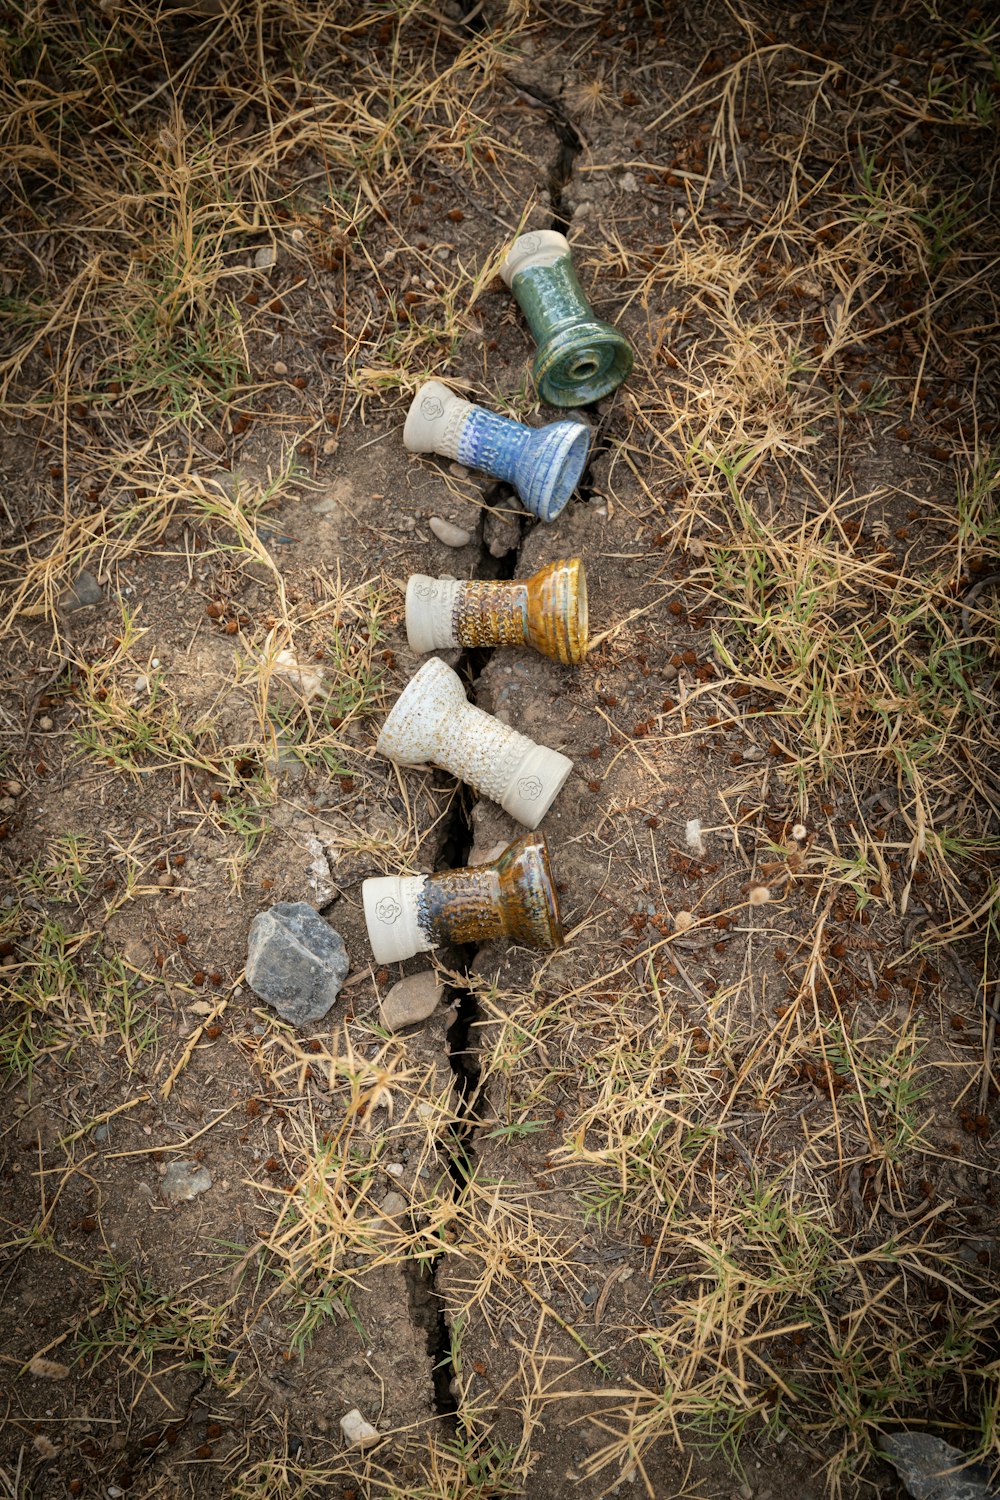 a group of bottles on the ground